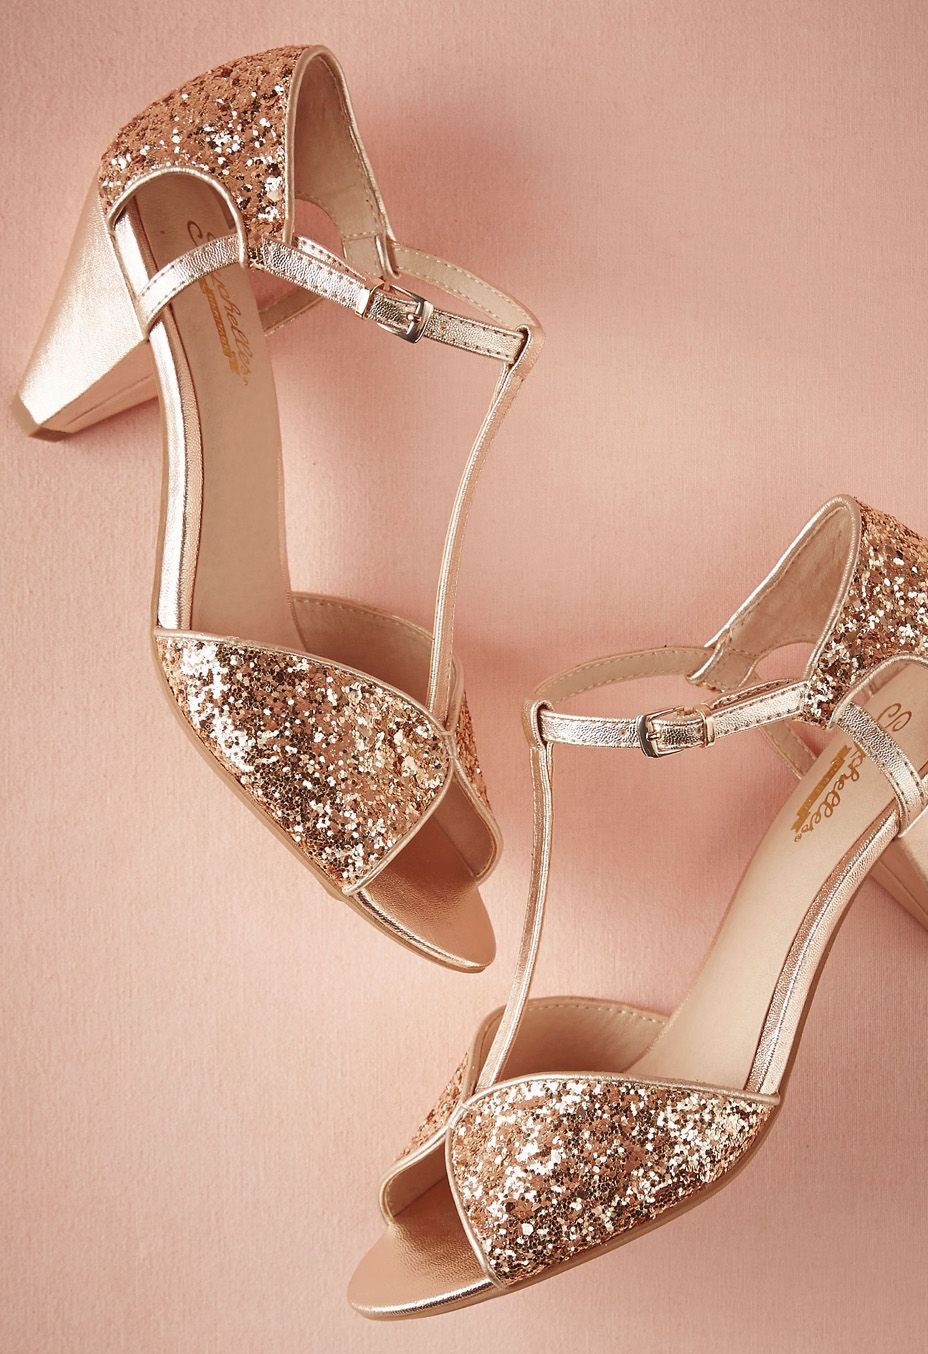 Rose Gold Wedding Shoes
 35 Gorgeous Pairs of Rose Gold Wedding Shoes To Try